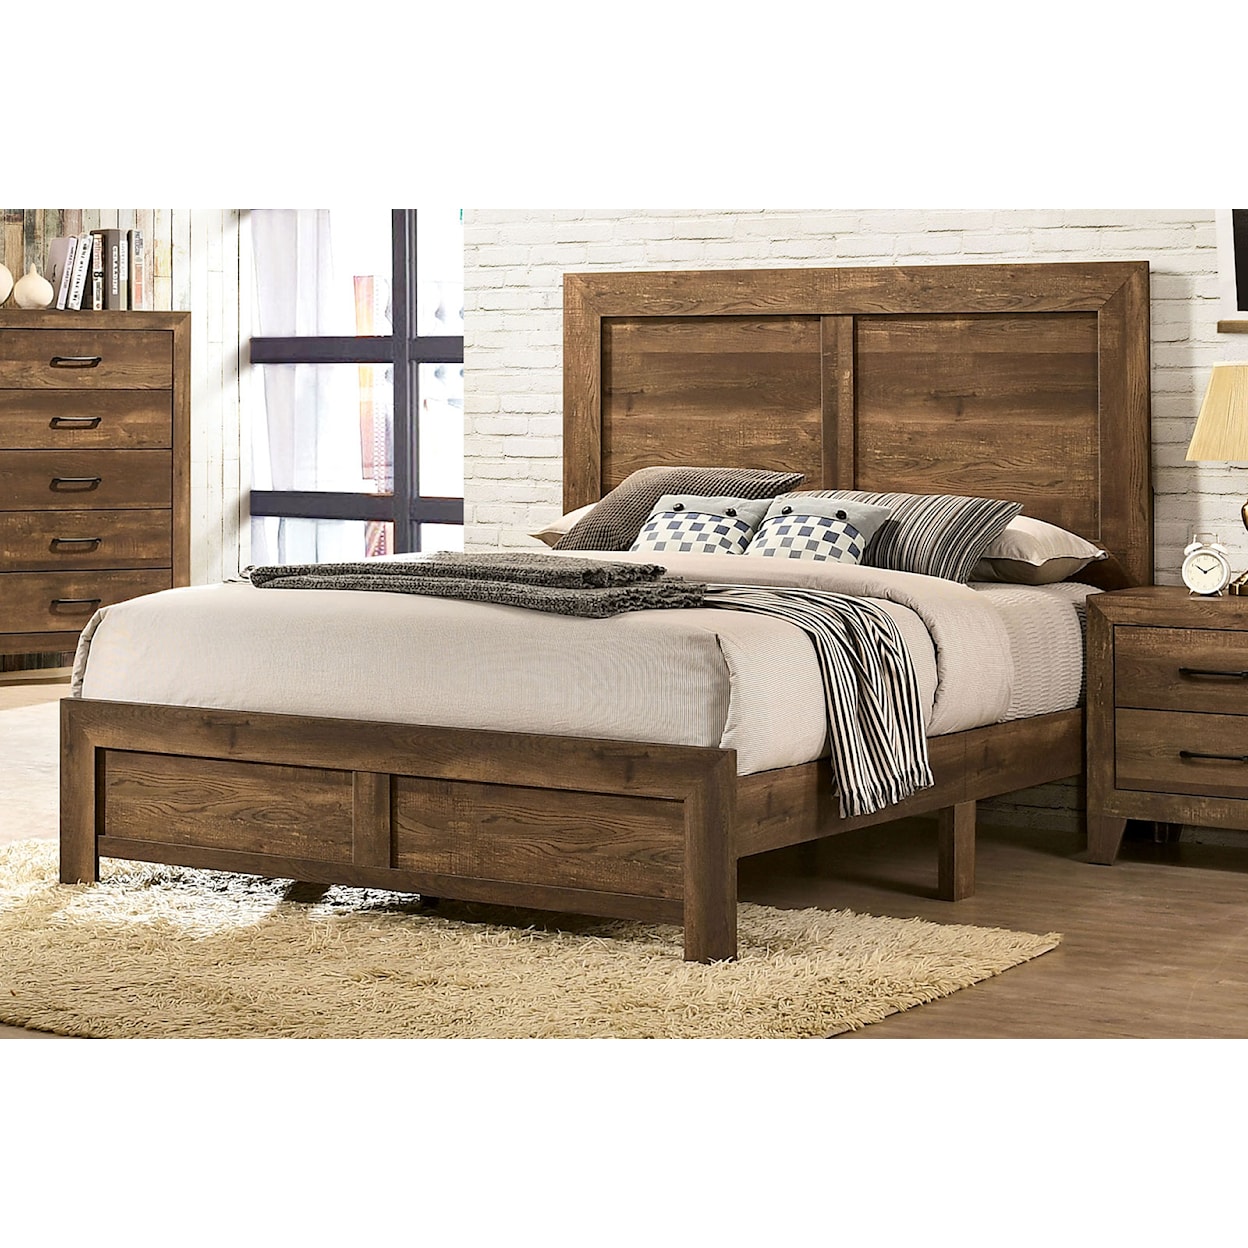 Furniture of America Wentworth Queen Bed